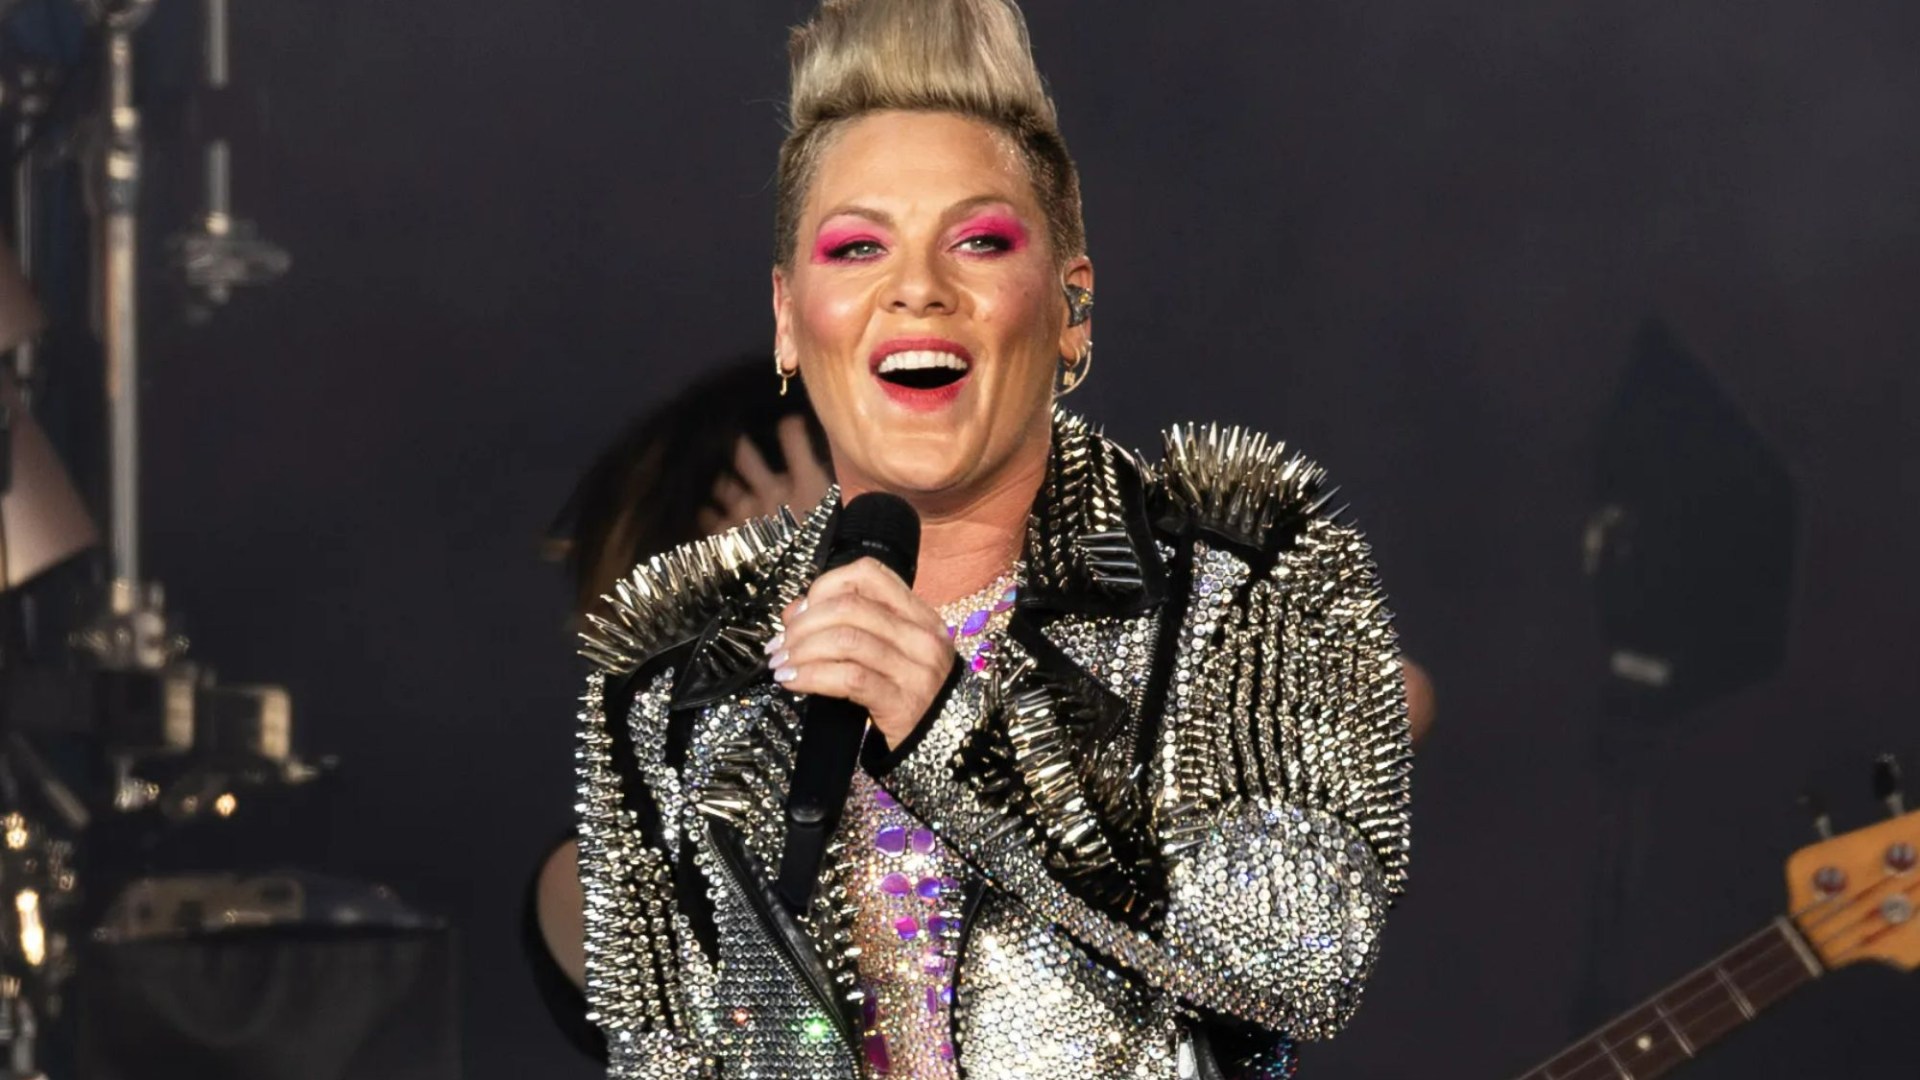 Pink cancels huge gig just hours before hitting the stage after falling ill [Video]